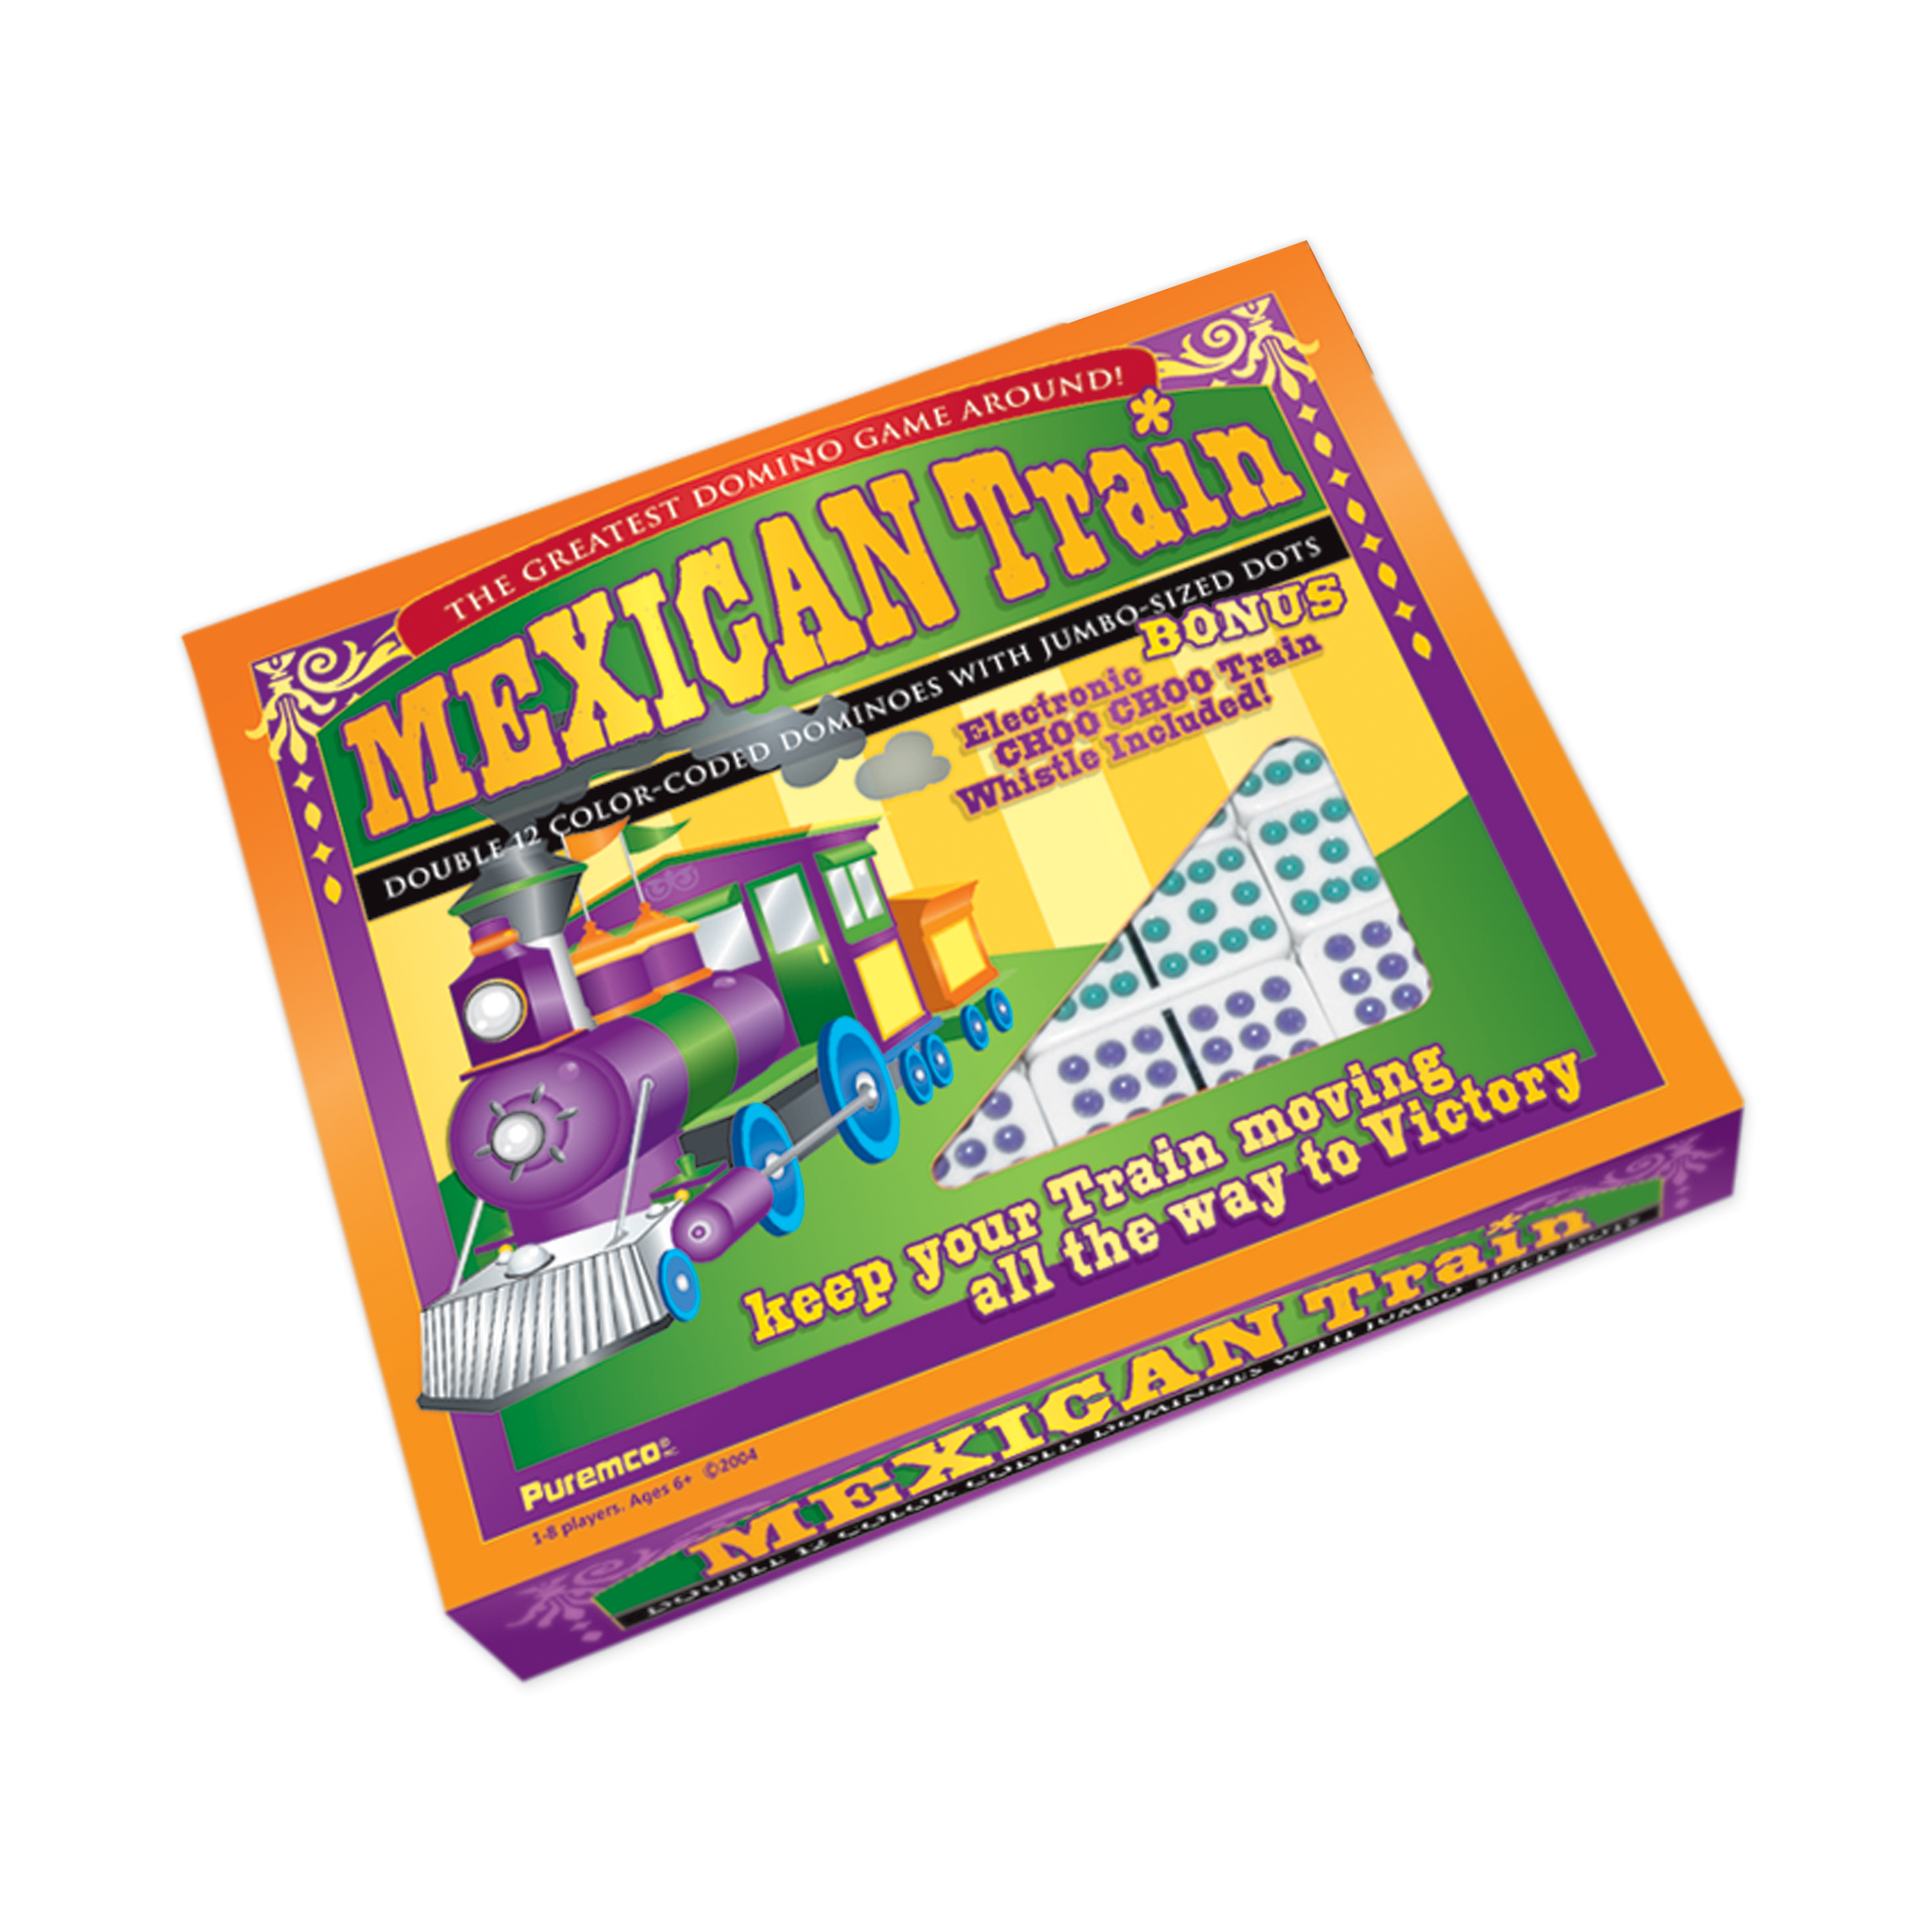 Puremco Mexican Train Double 12 Color Dot Dominoes - Professional Size